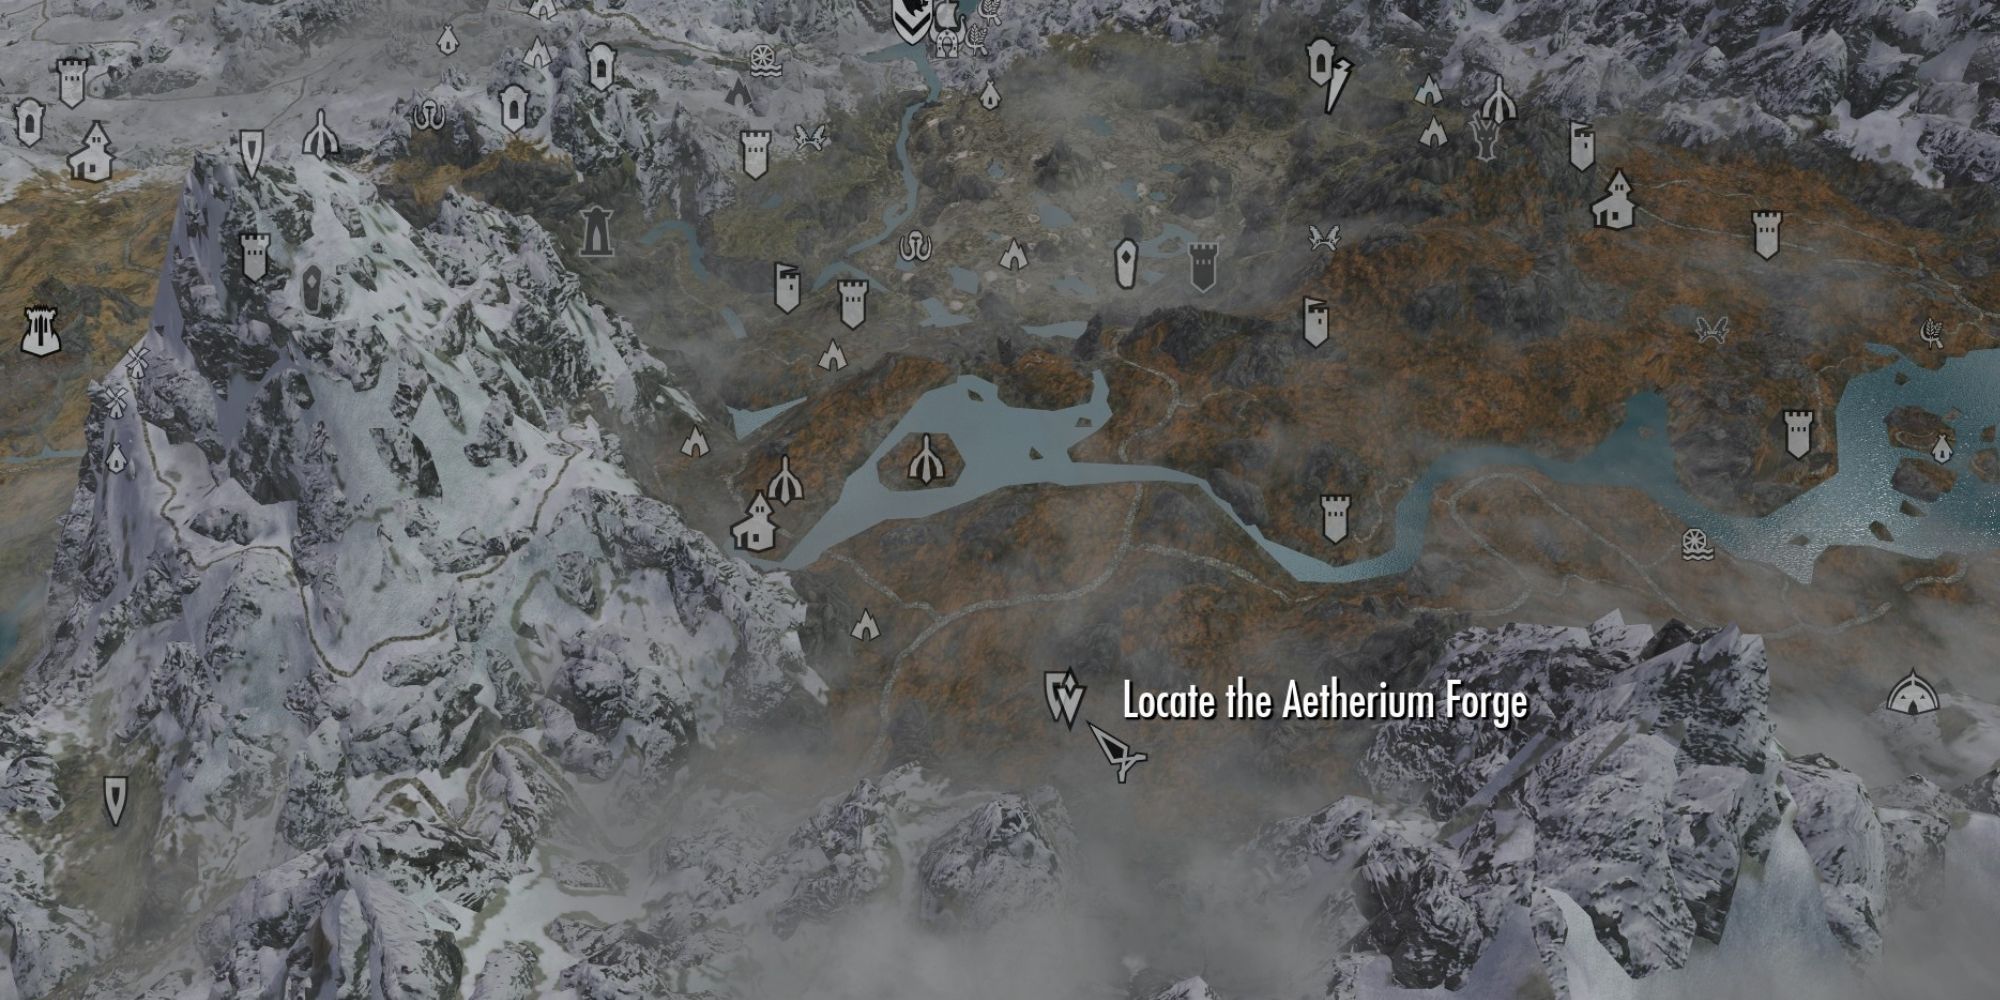 Skyrim Map - Location of the Aetherium Forge (Ruins of Bthlaft)